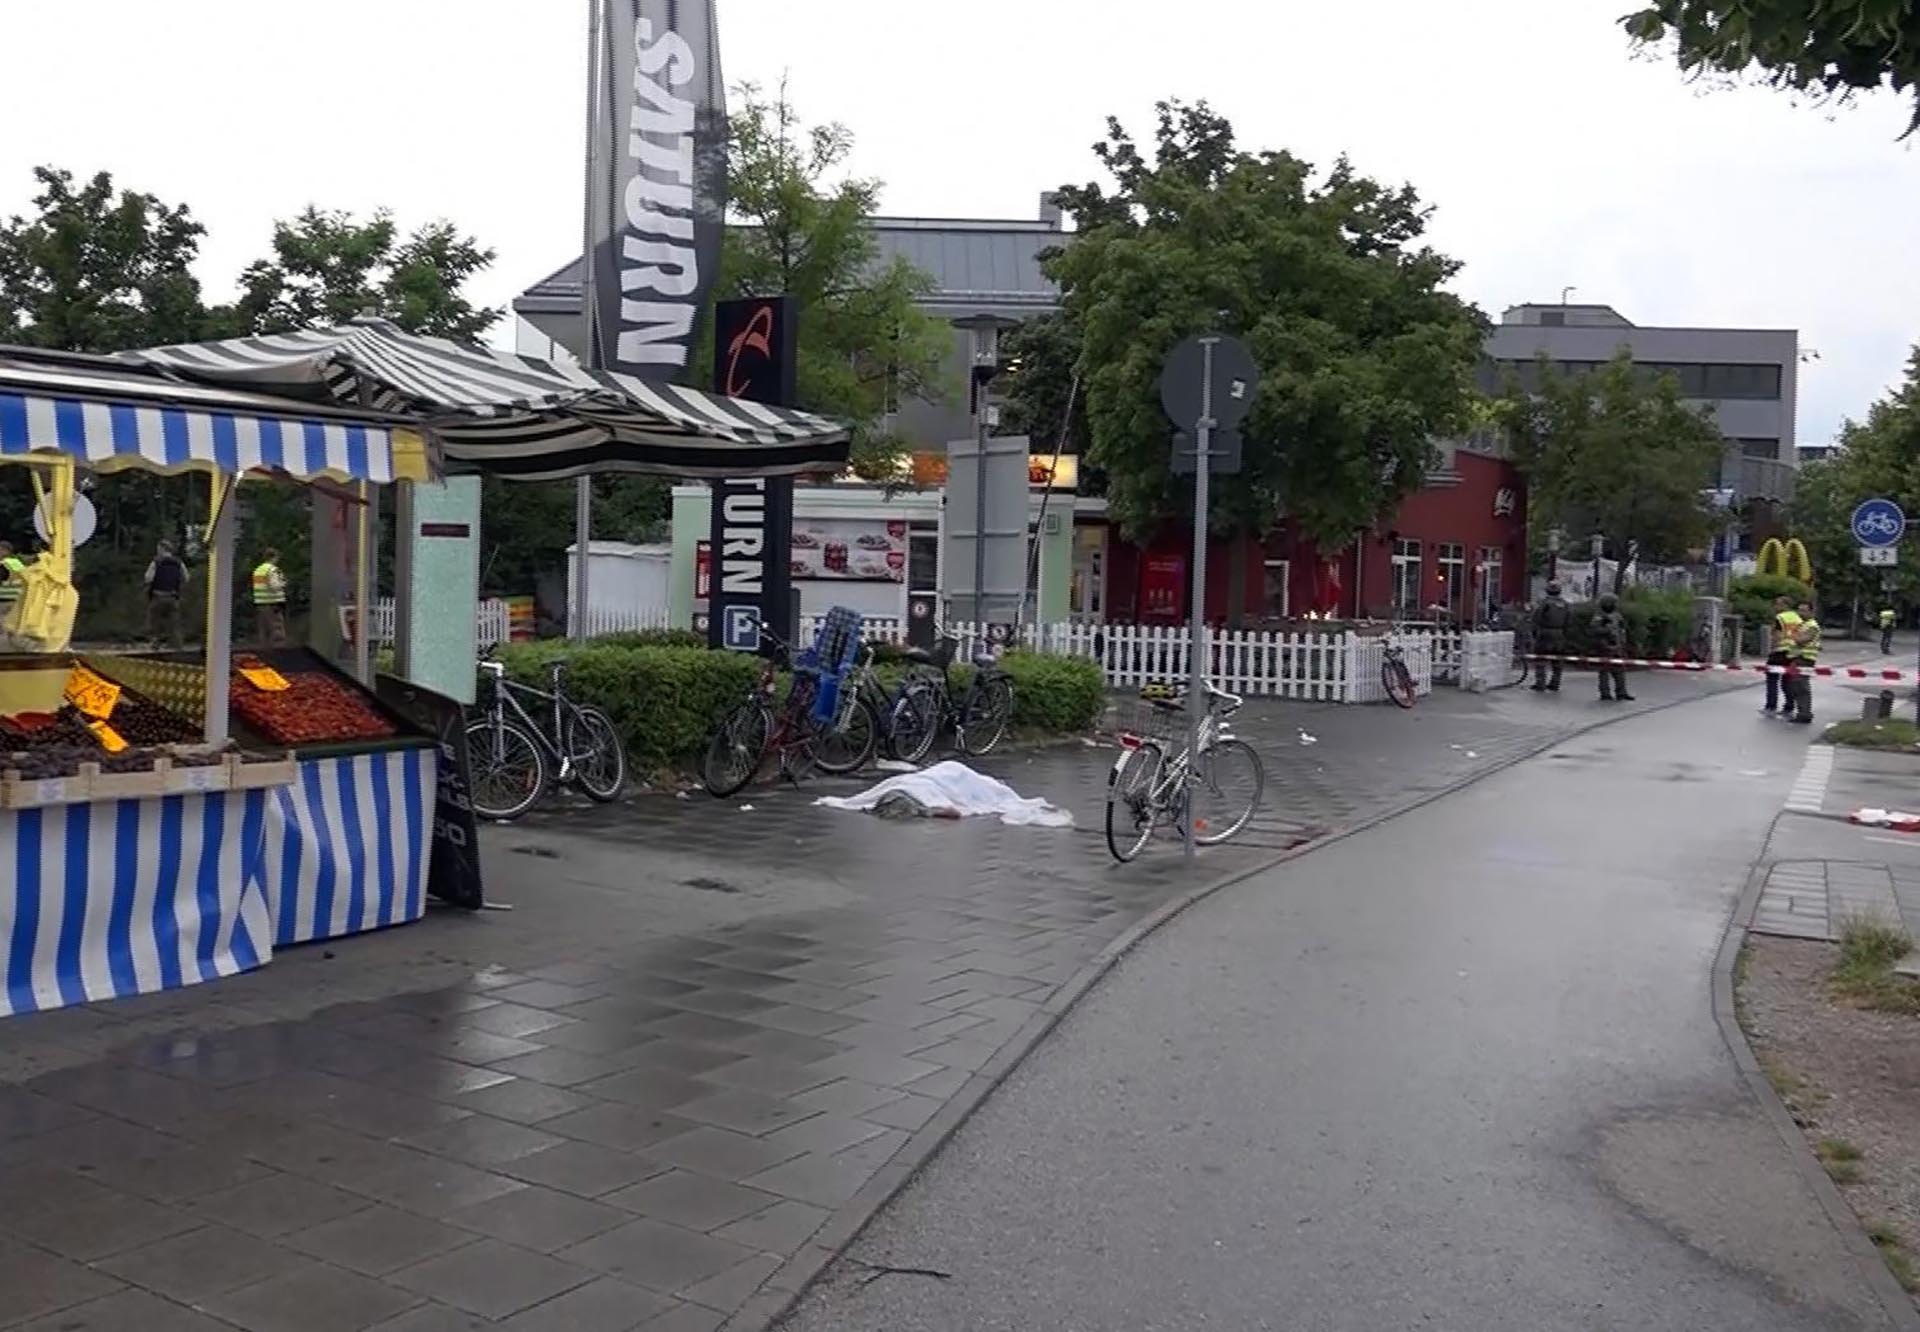 GERMANY OUT In this grab taken from video, a body covered with a sheet outside the mall, in Munich, Germany, Friday, July 22, 2016. A manhunt was underway Friday for a shooter or shooters who opened fire at a shopping mall in Munich, killing and wounding several people, a Munich police spokeswoman said. The city transit system shut down and police asked people to avoid public places. (NONSTOP NEWS via AP)